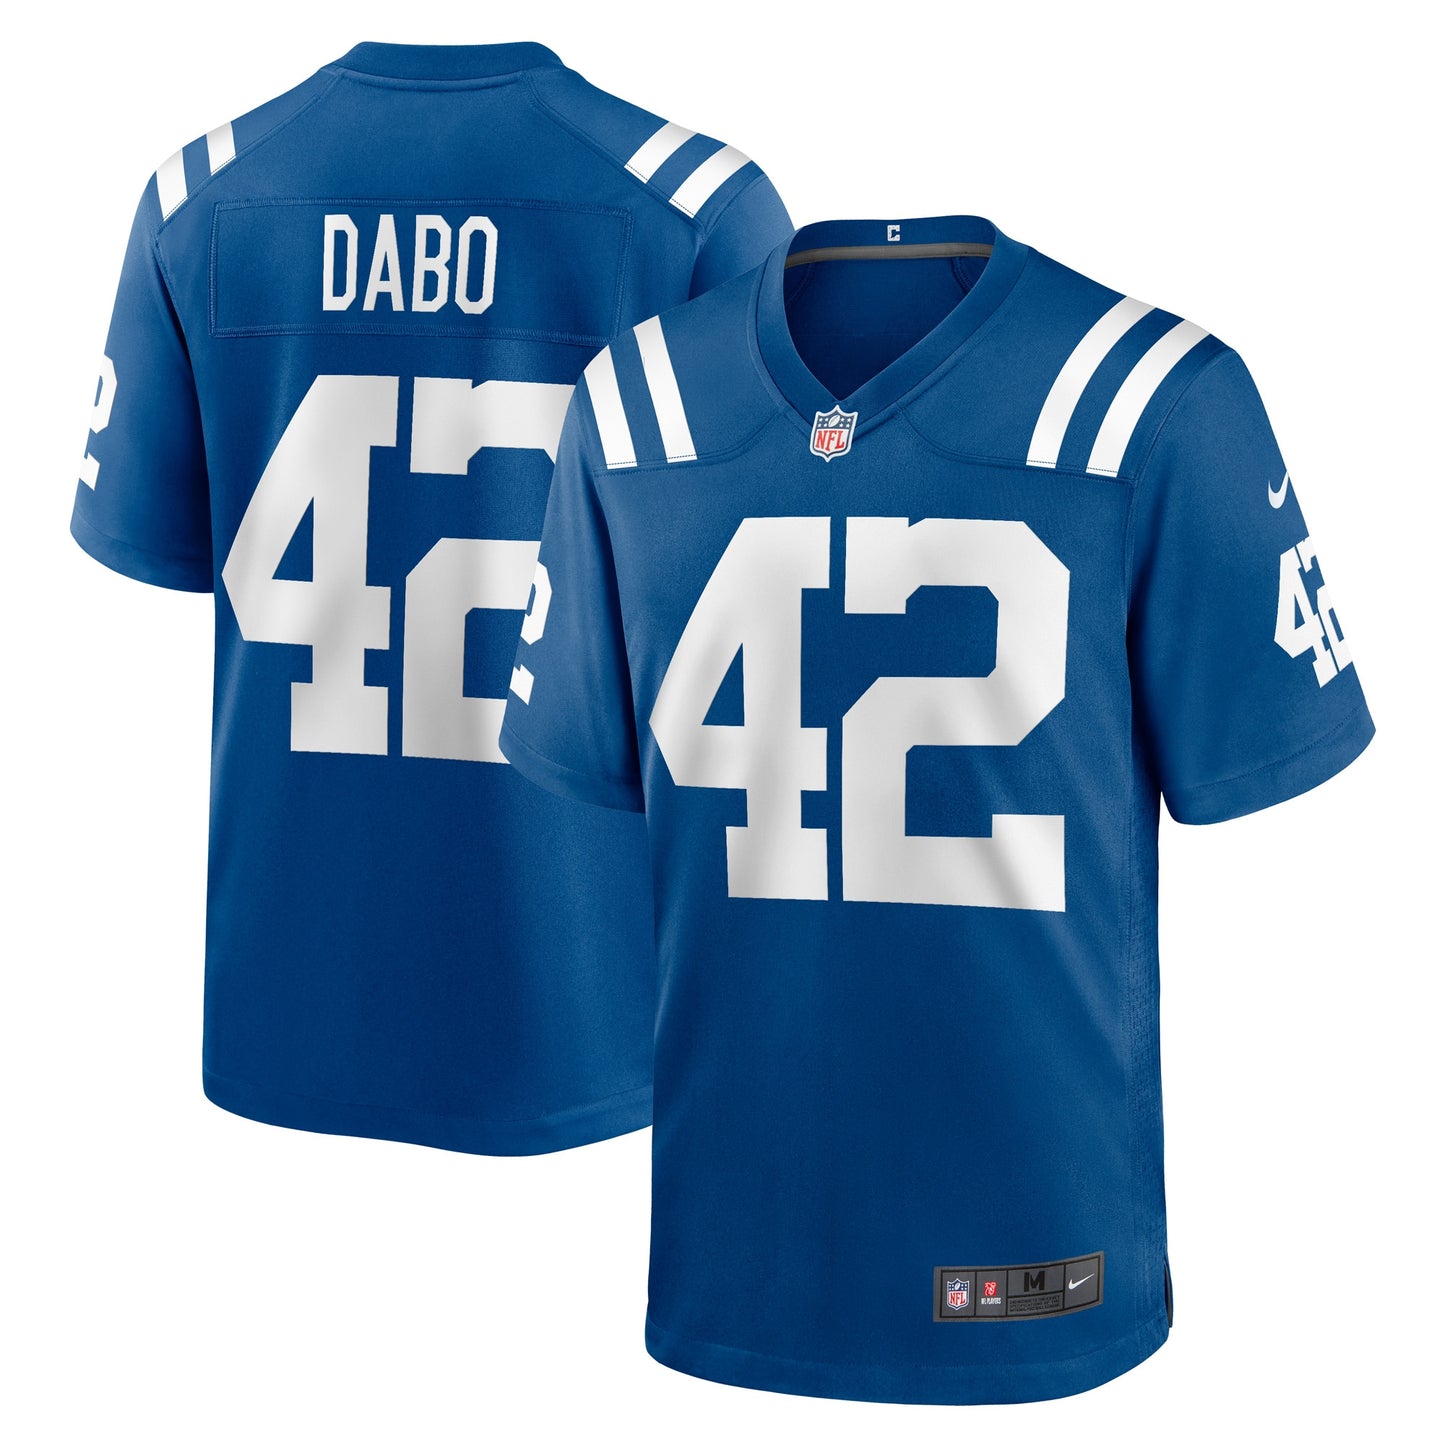 Marcel Dabo Indianapolis Colts Nike Game Player Jersey - Royal